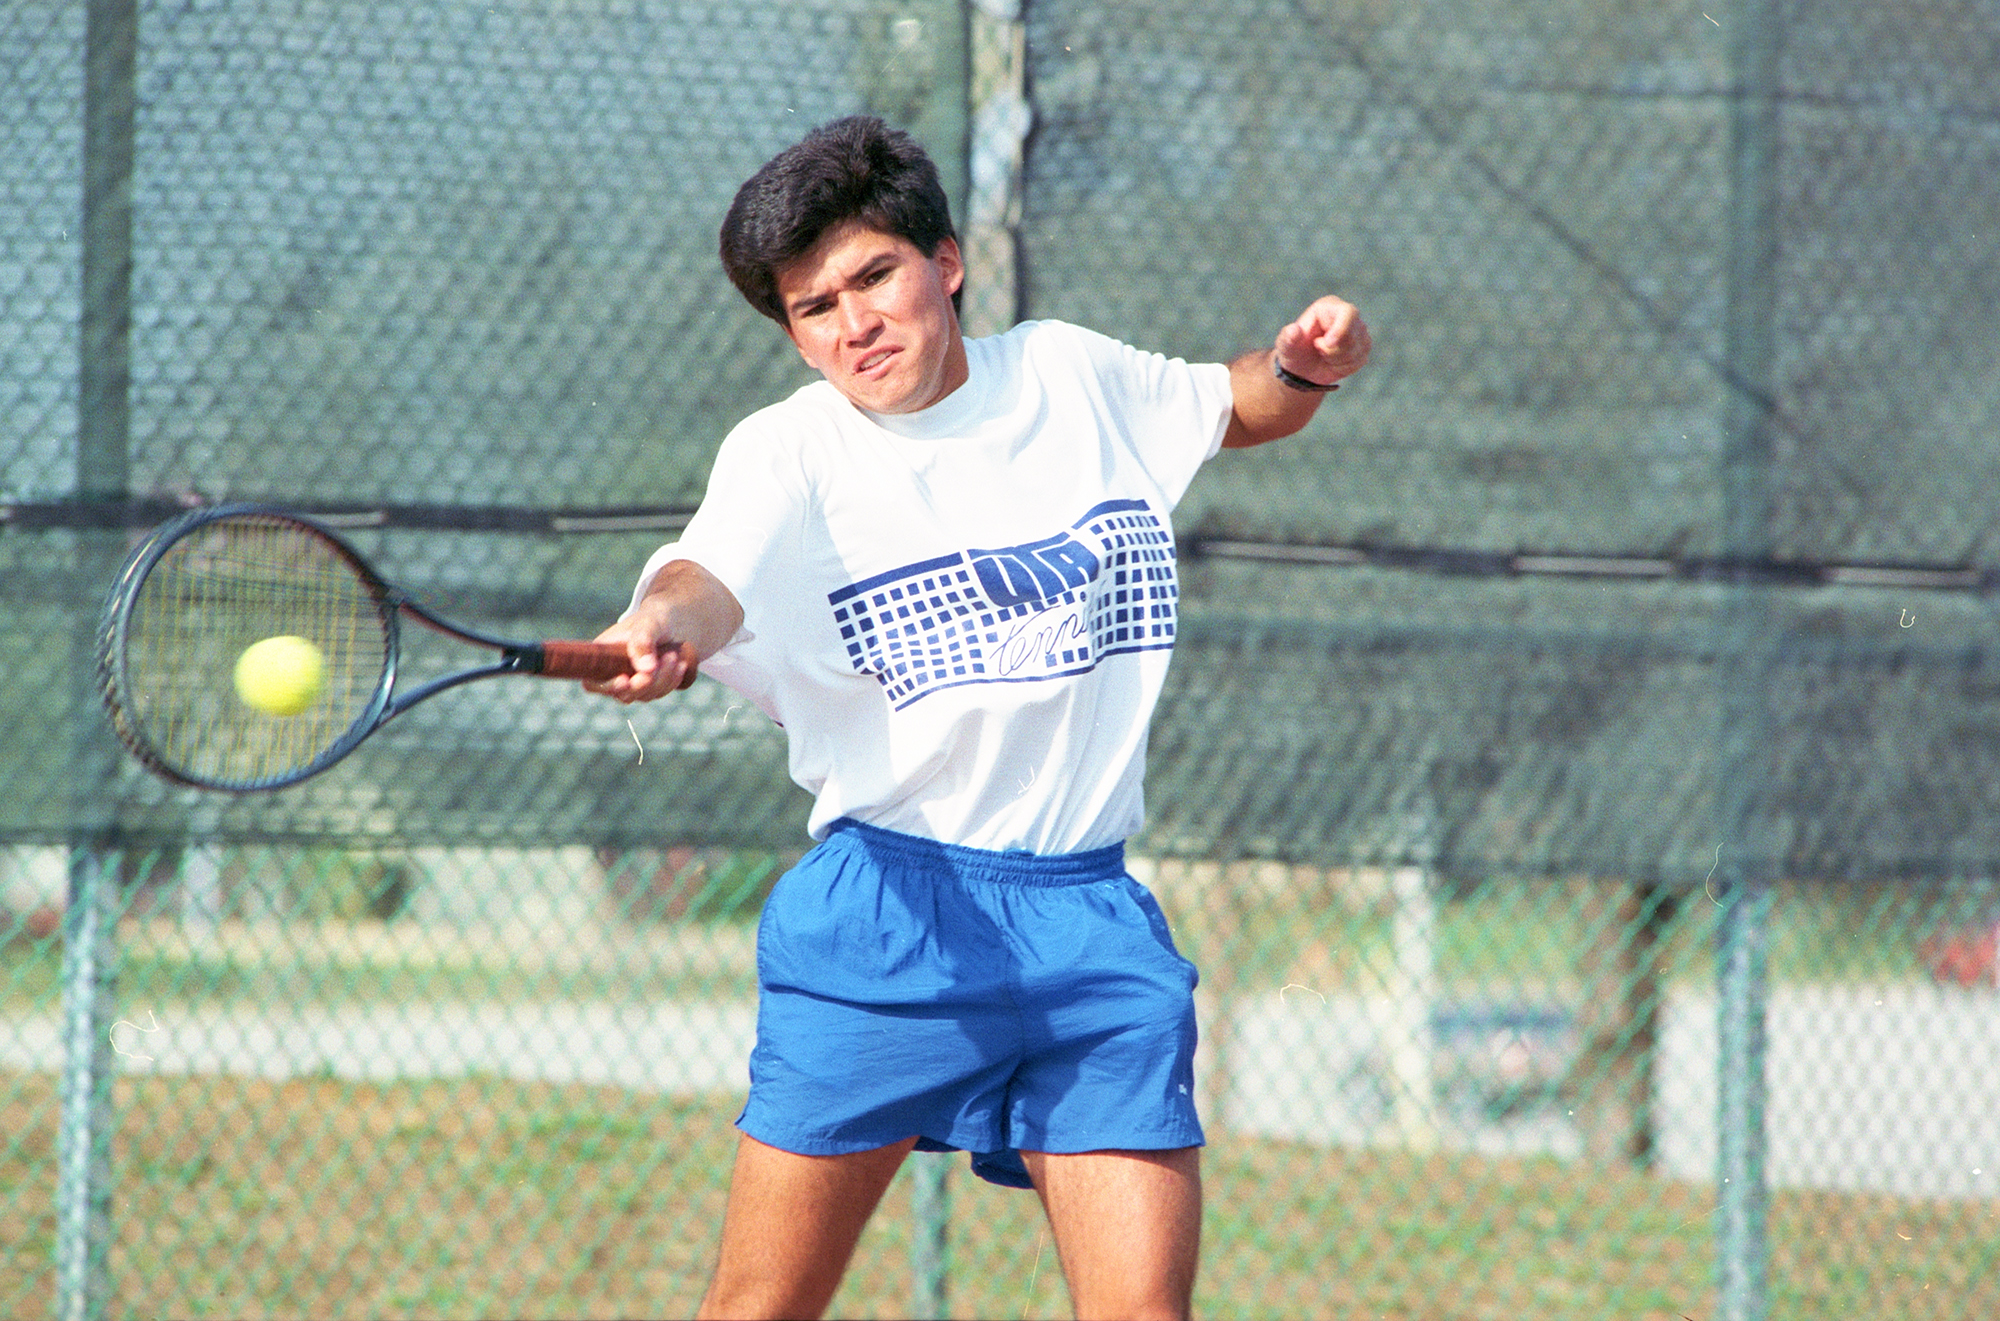 Color photo of a tennis player hitting the tennis ball with a racquet during a tennis match.